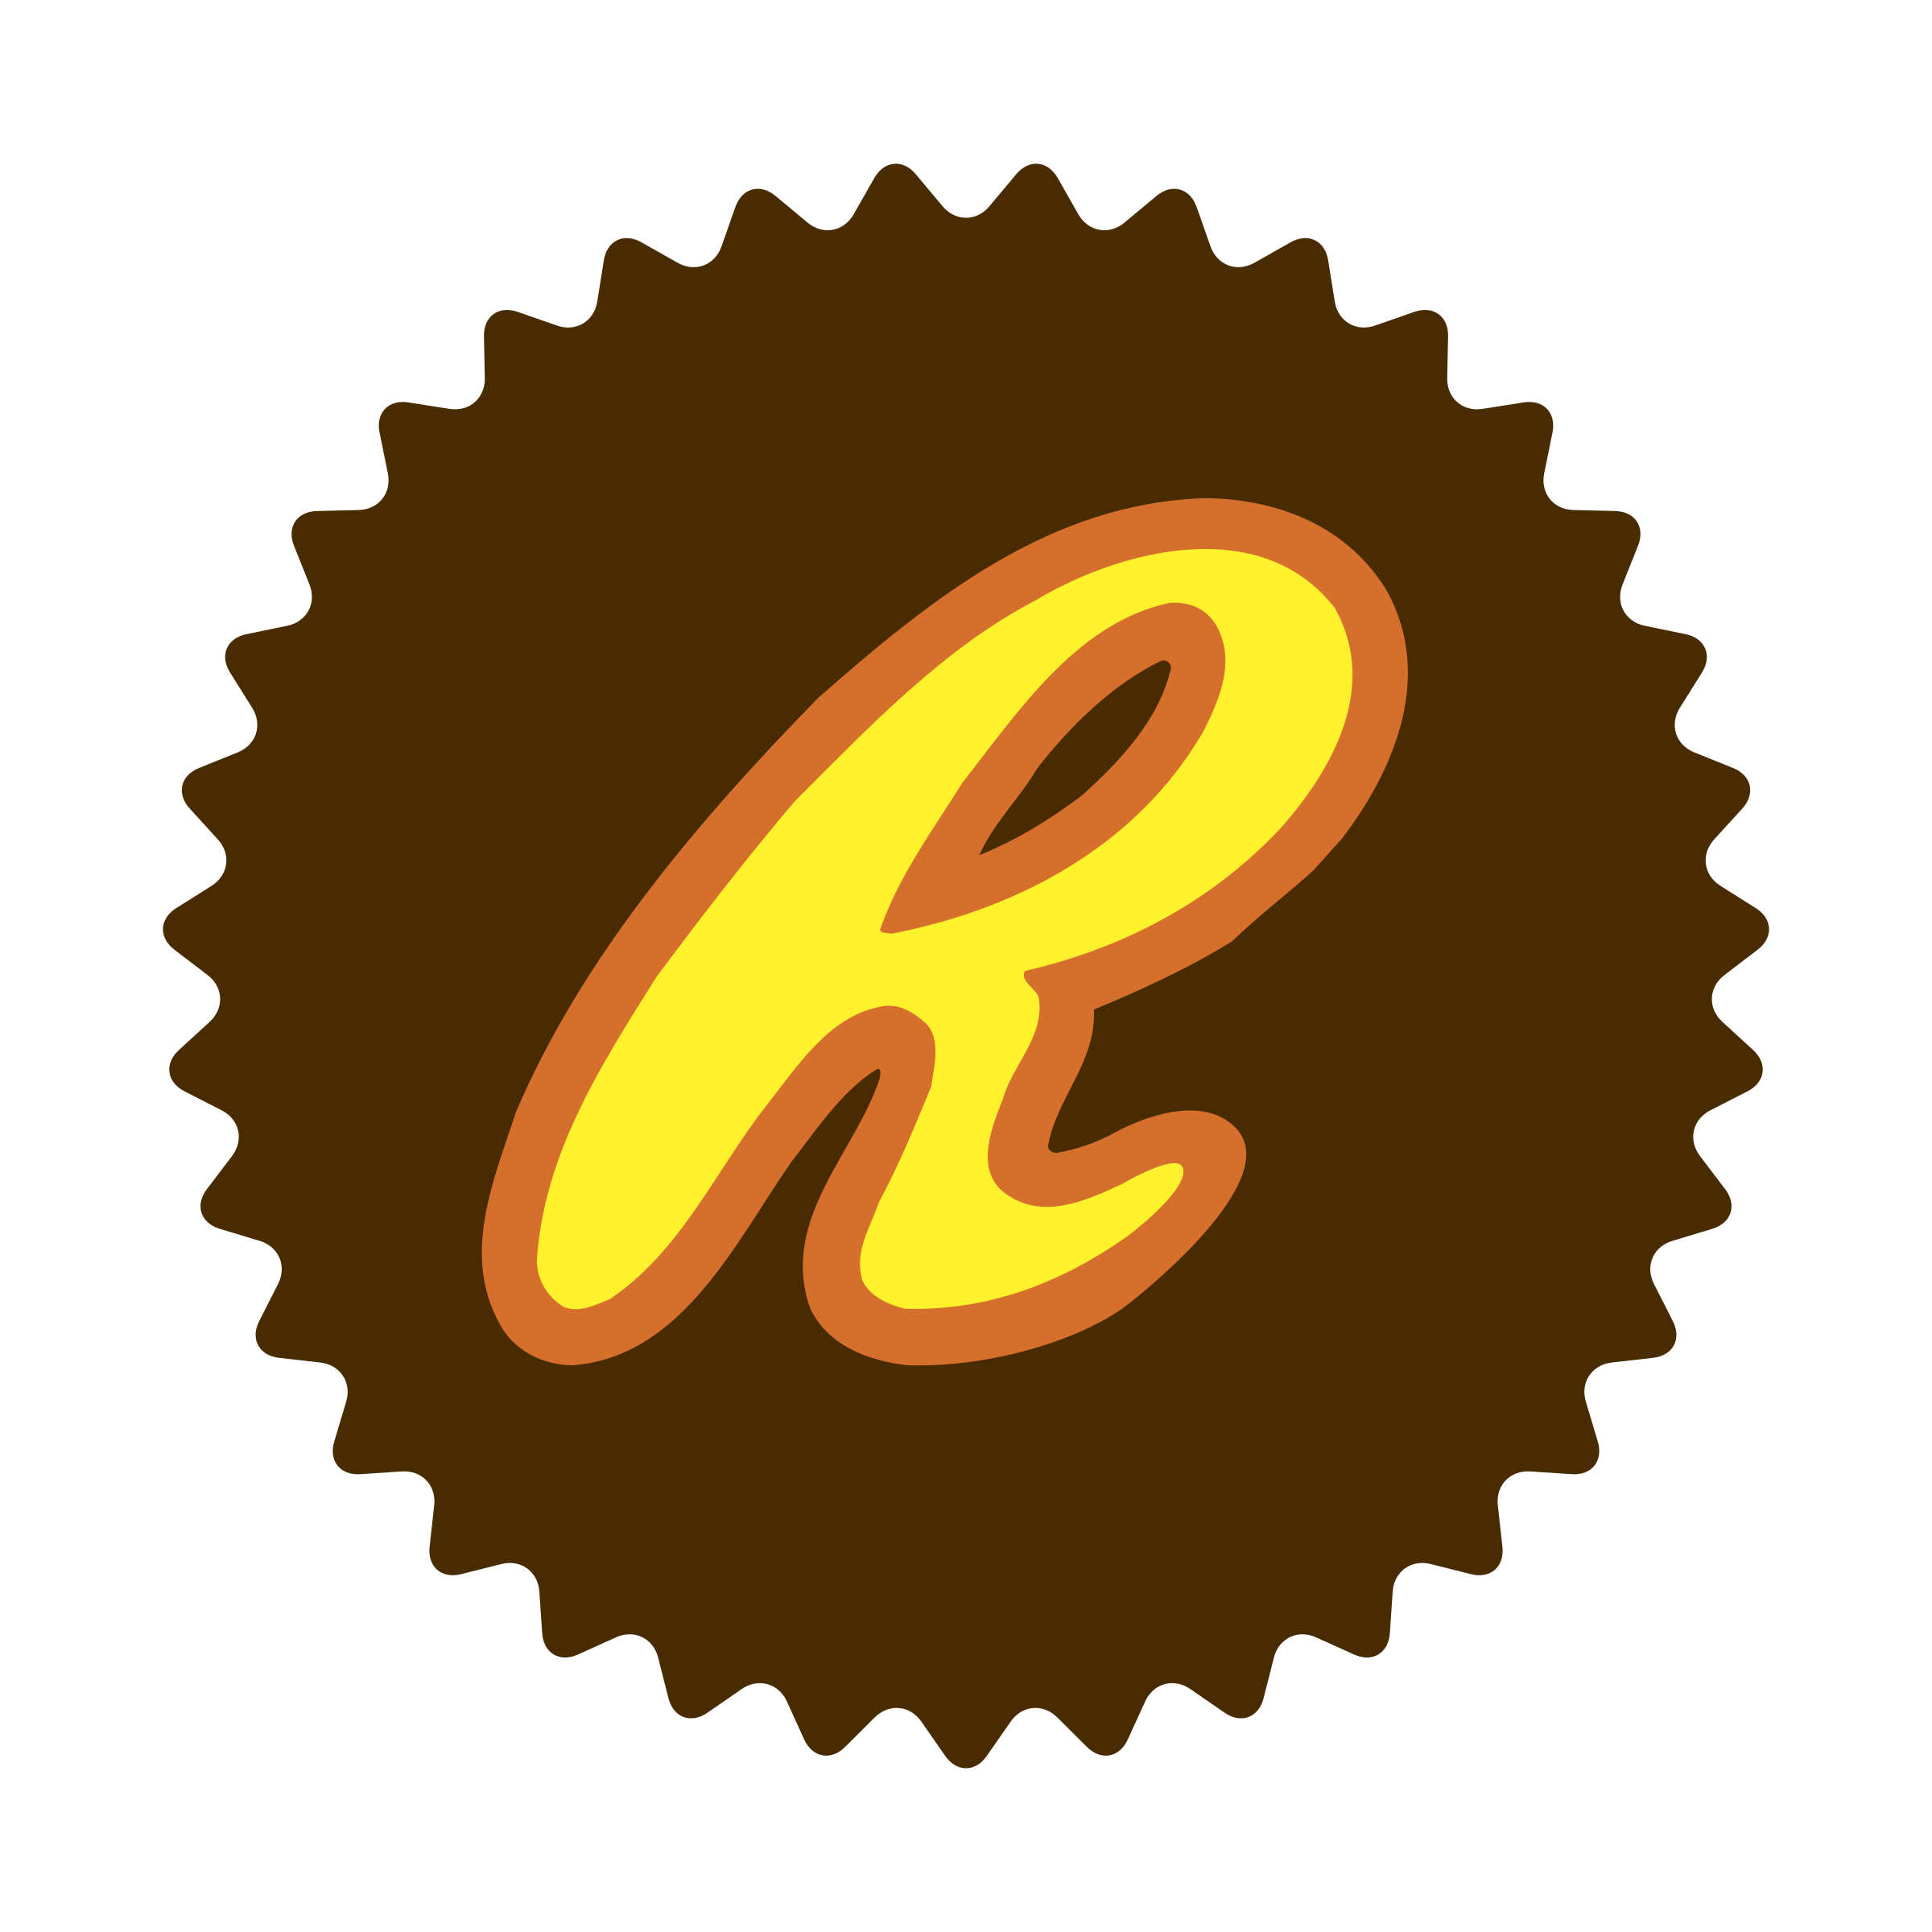 Reese's Logo - Reese's Logo PNG Transparent & SVG Vector